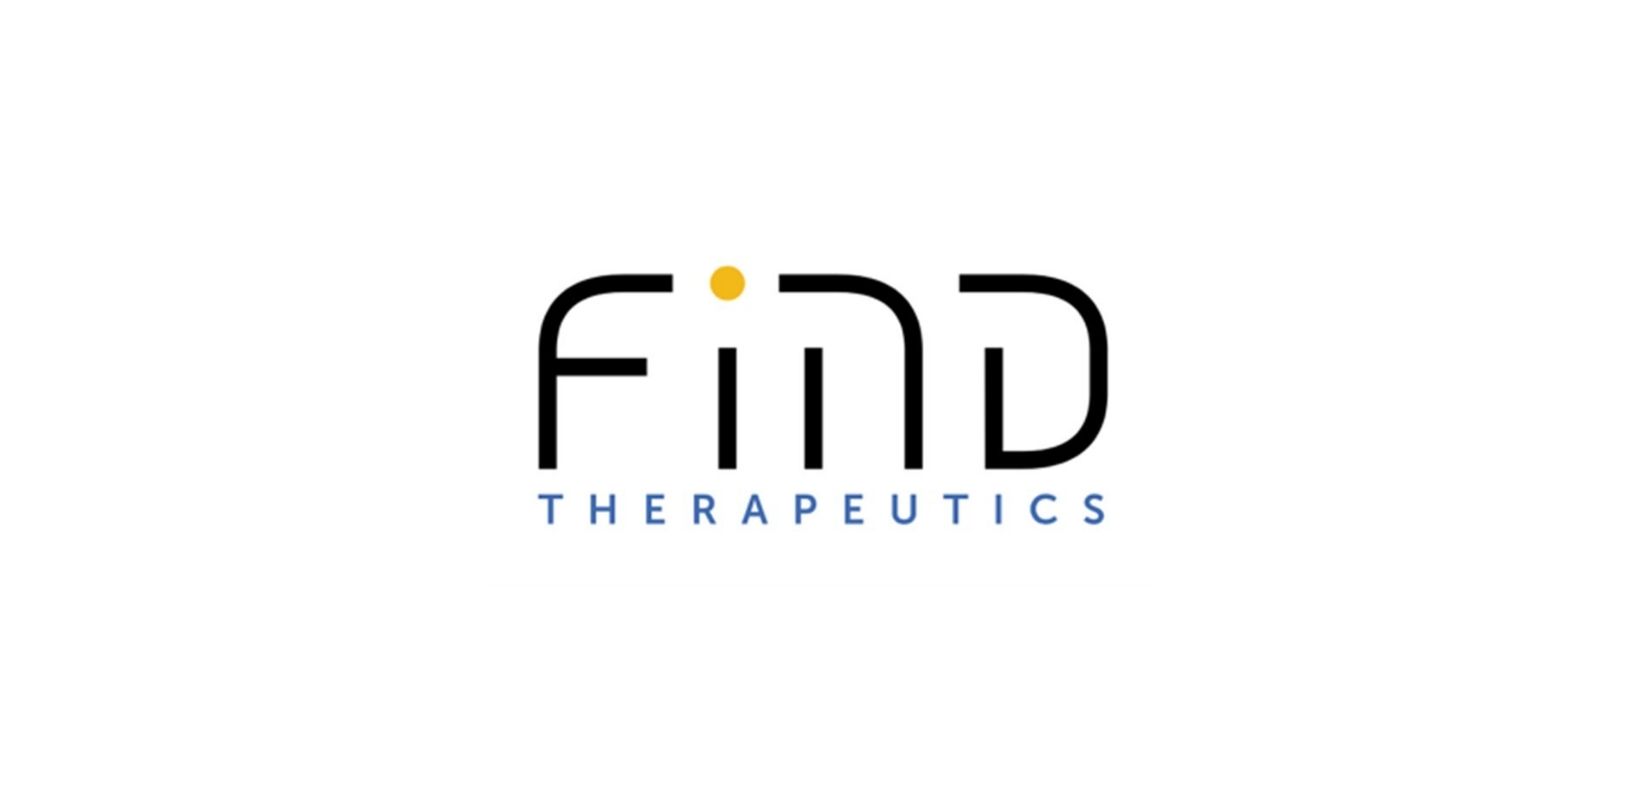 adMare Porfolio Company Find Therapeutics Signs Licensing agreement to Develop a Promising New Therapy for Multiple Sclerosis and Other Demyelinating Diseases